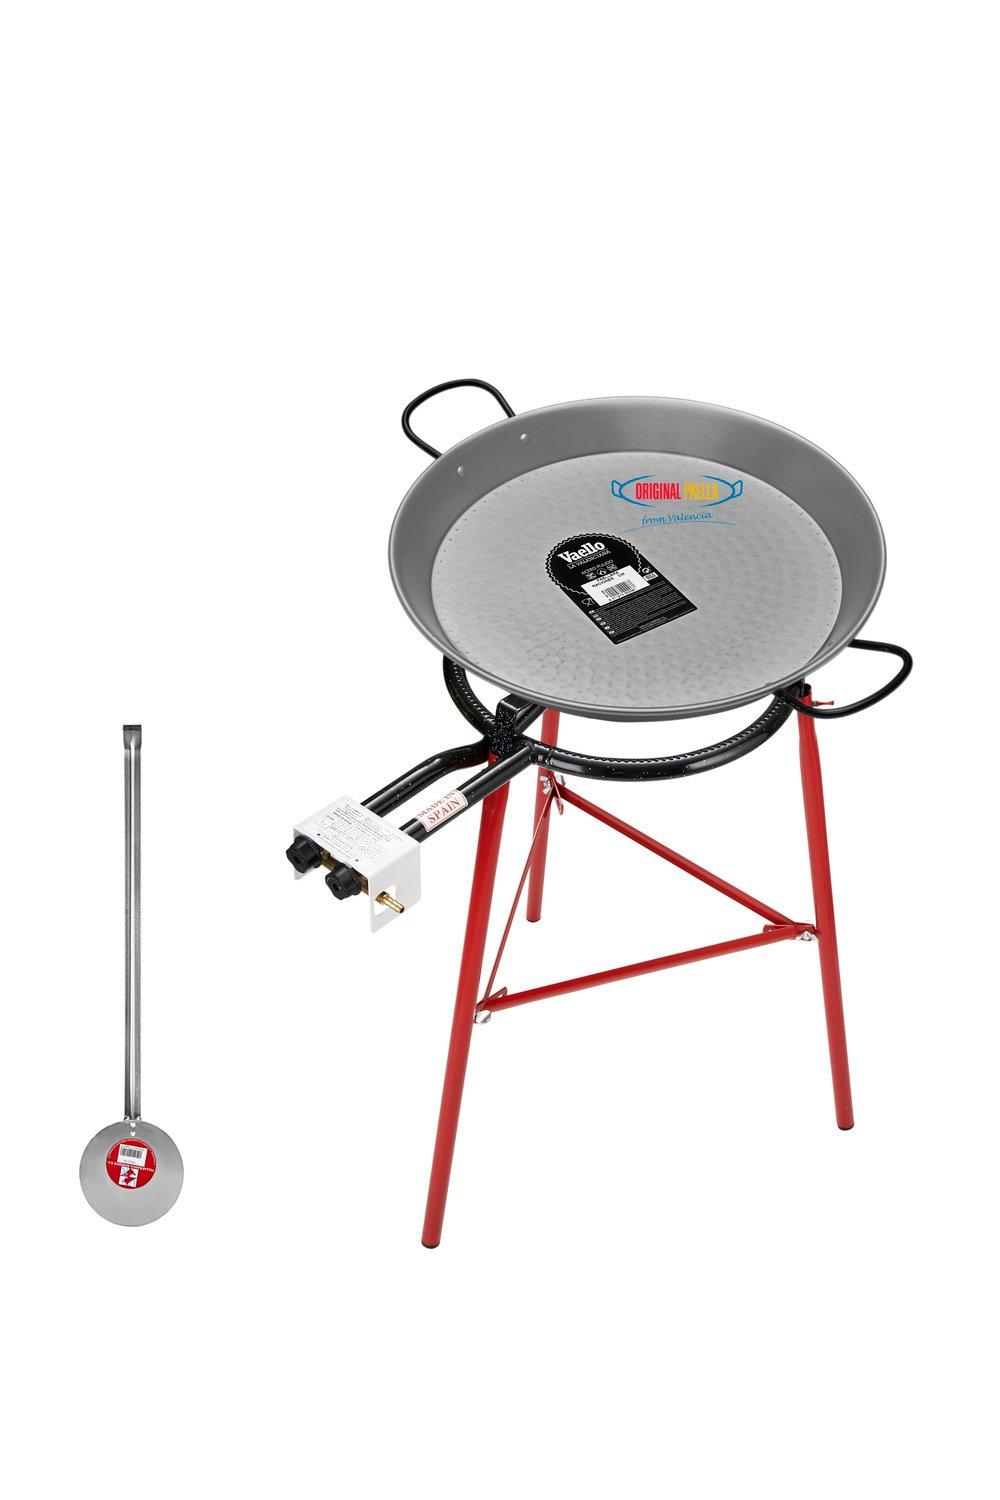 Paella Cooking Set with 60cm Polished Steel Paella Pan